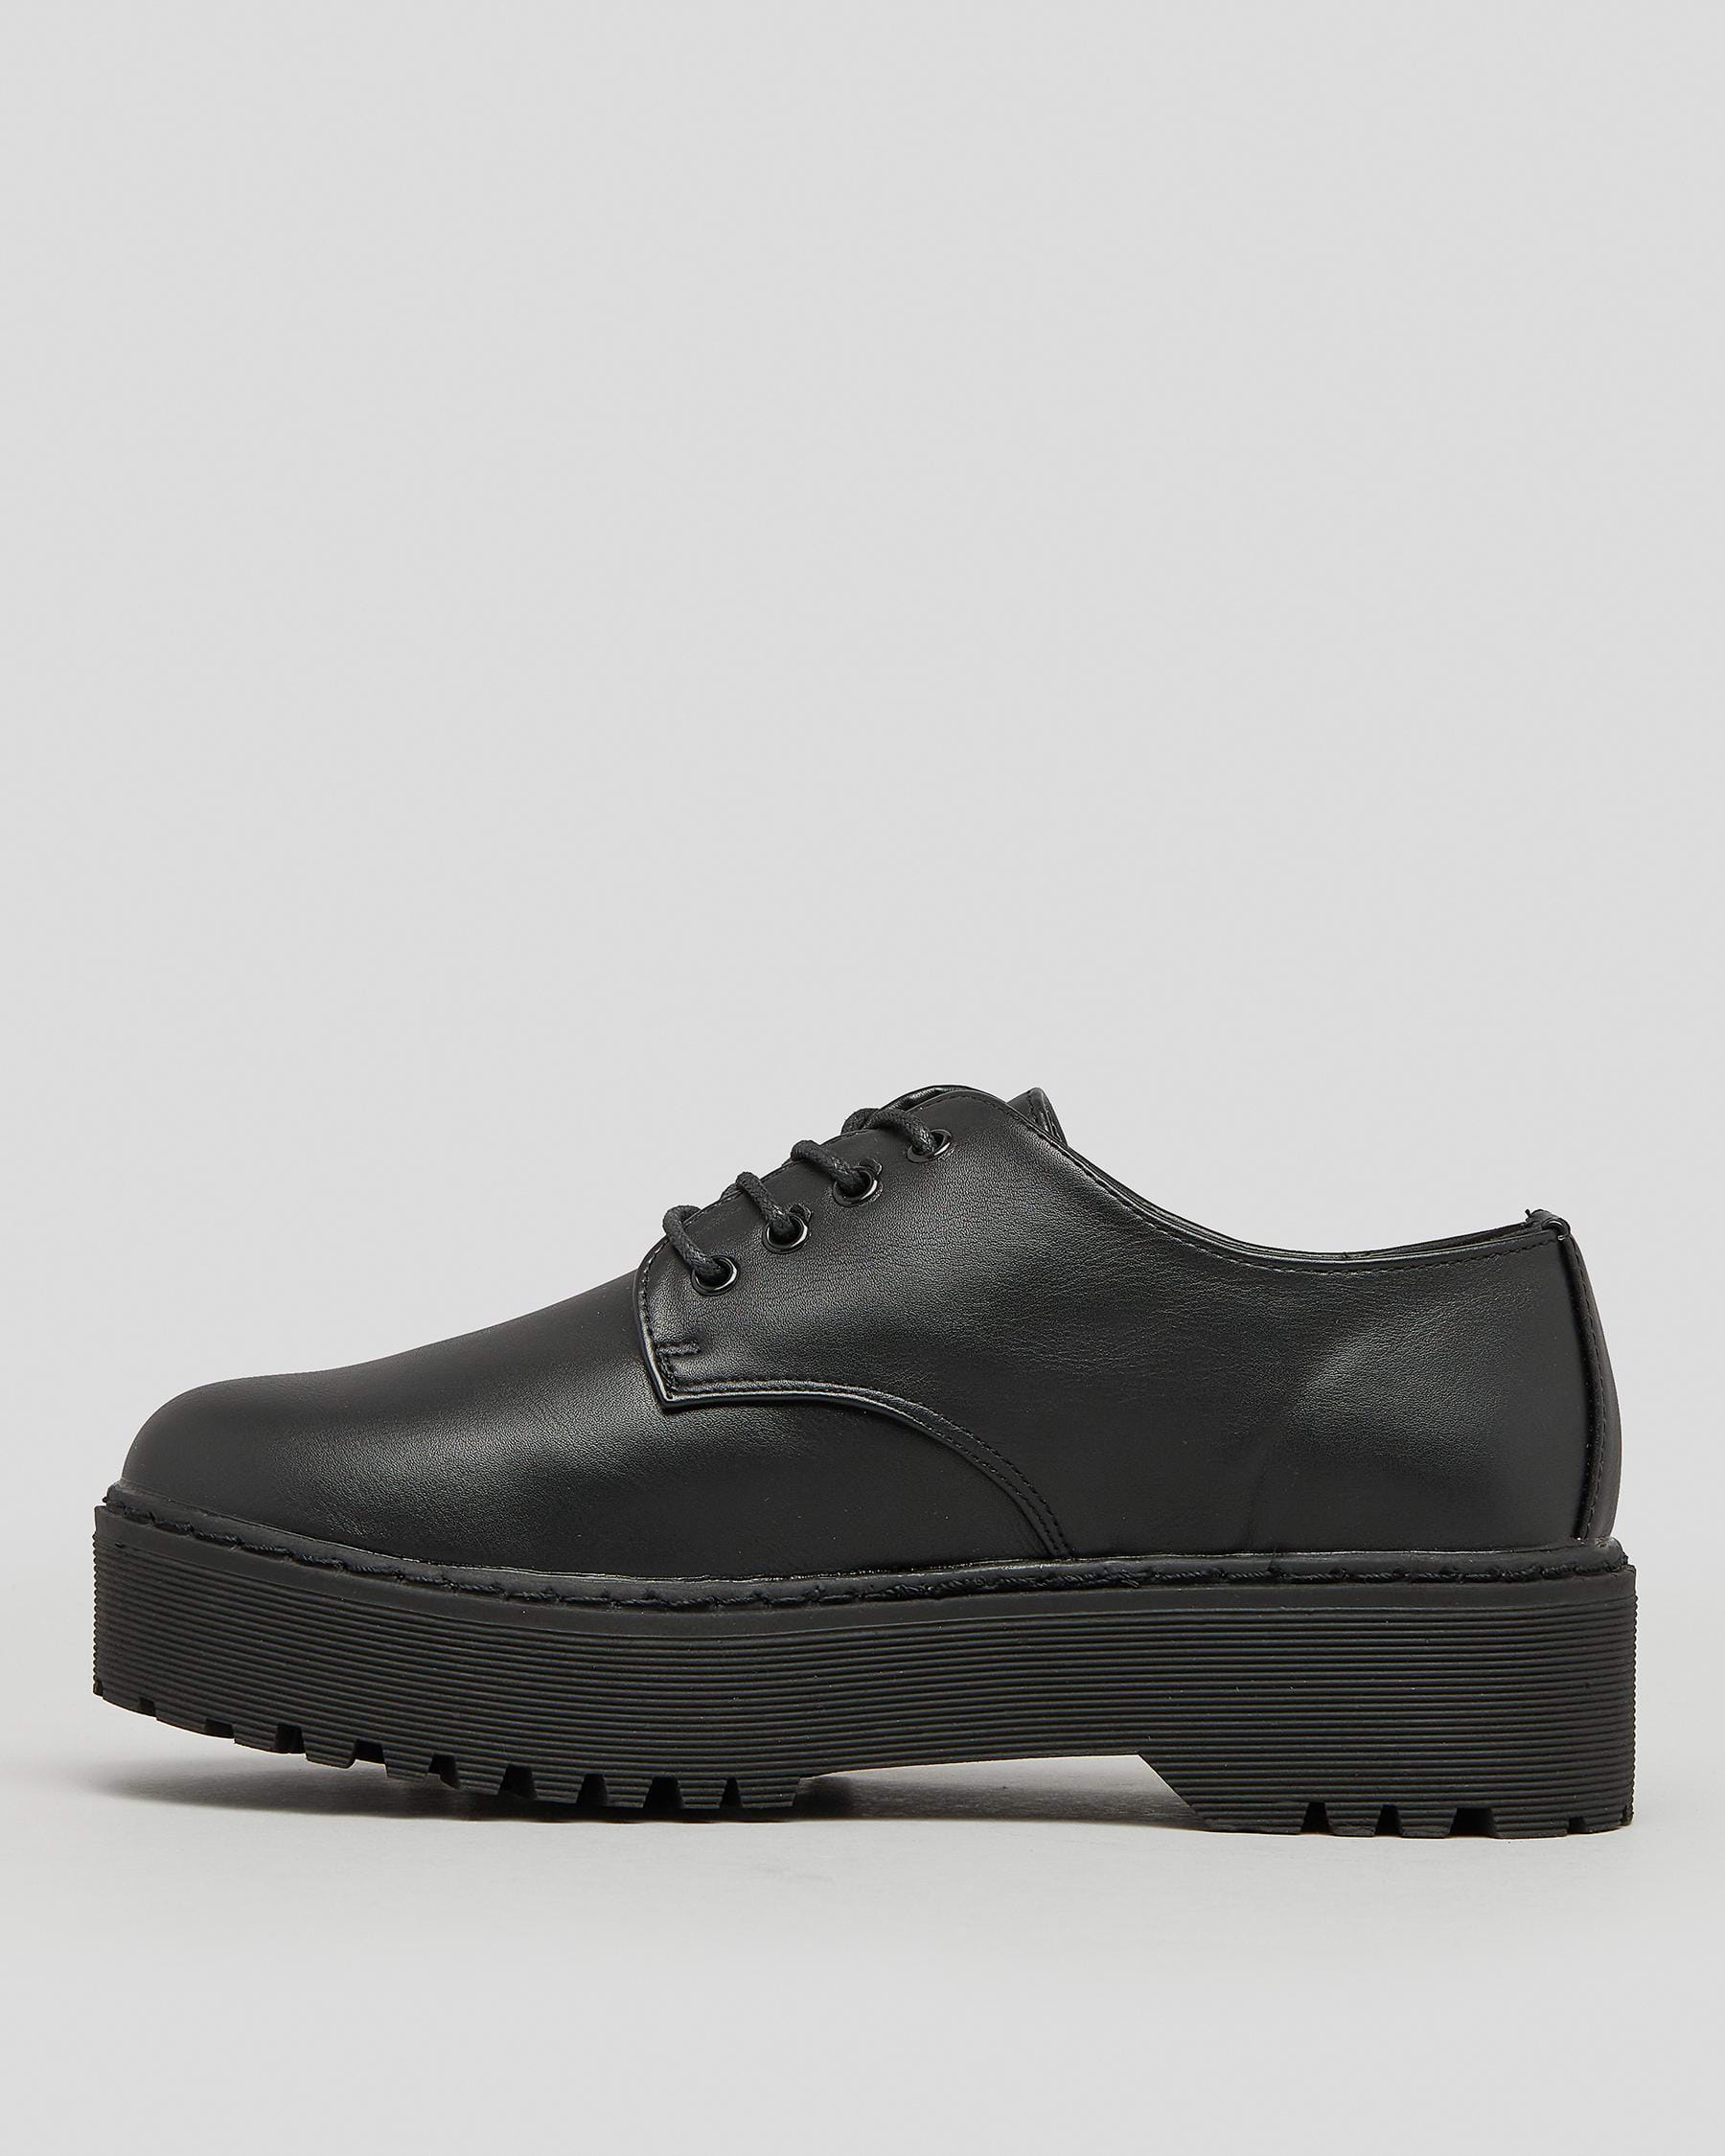 Ava And Ever Freddy Shoes In Black - Fast Shipping & Easy Returns ...